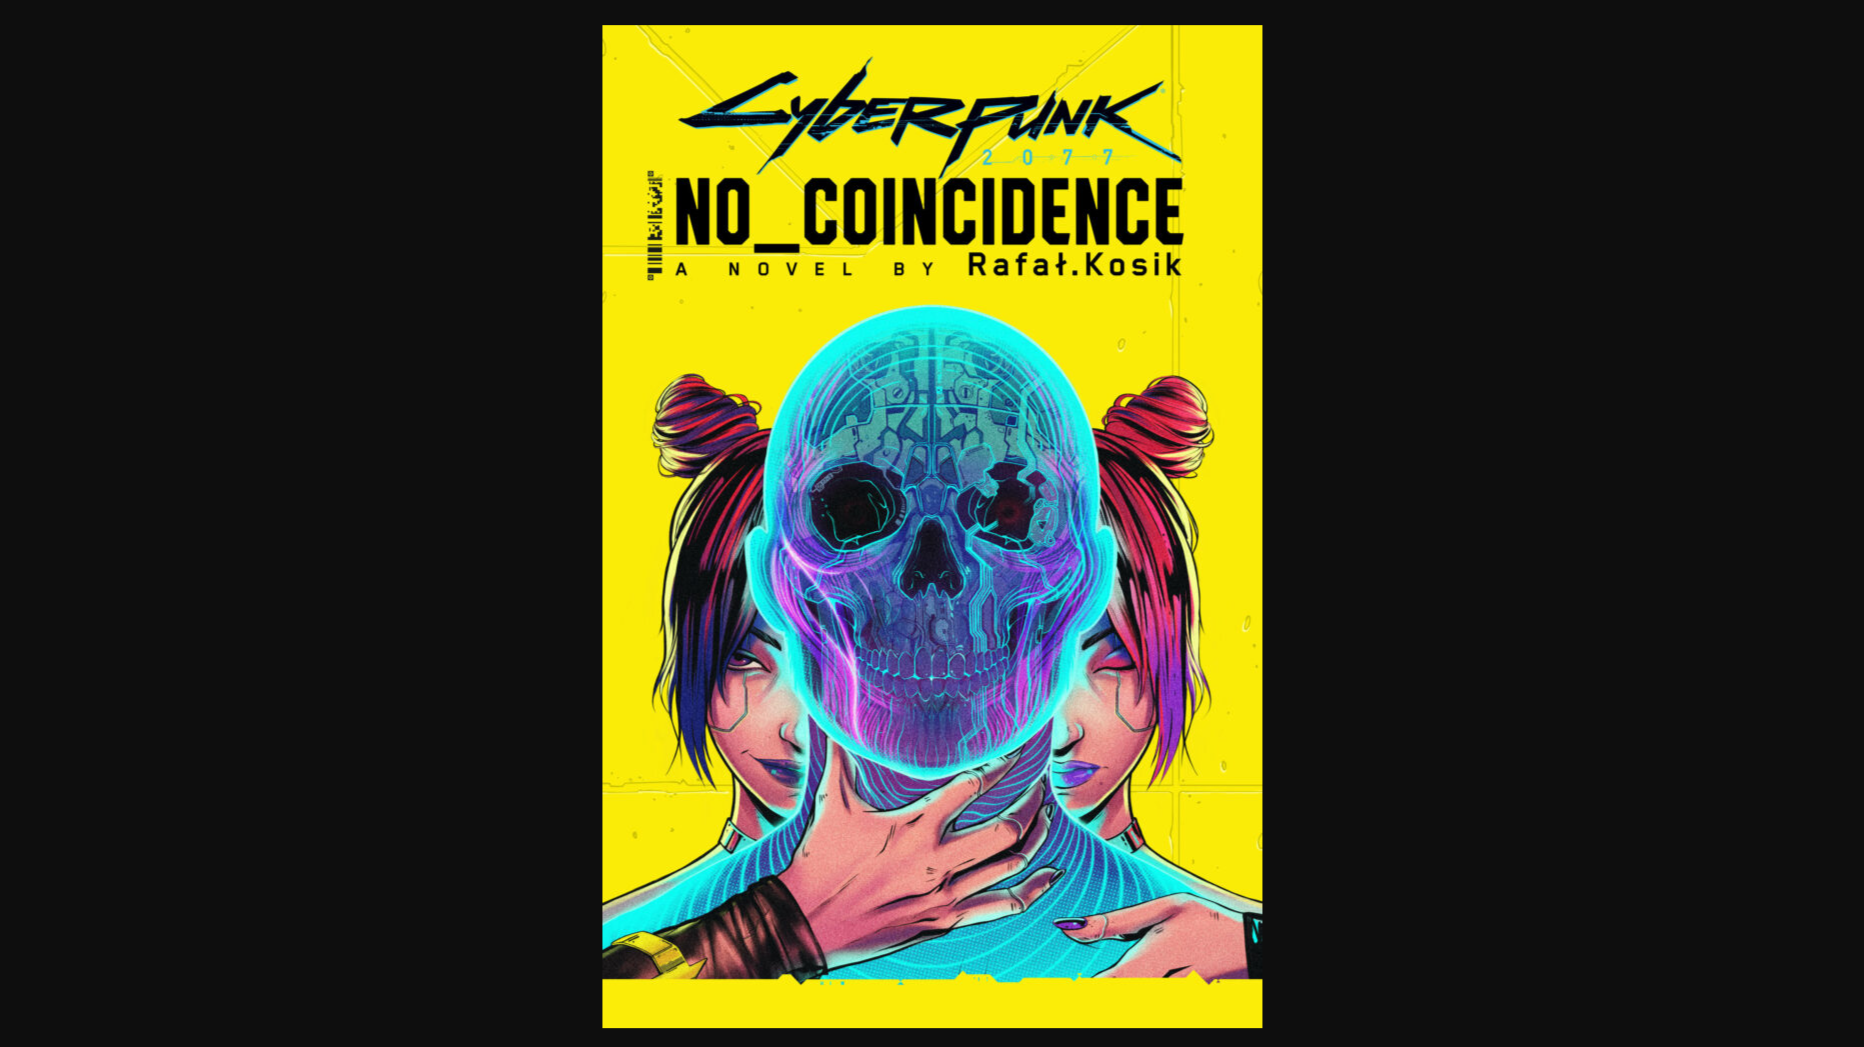 cyberpunk 2077 no coincidence featured image